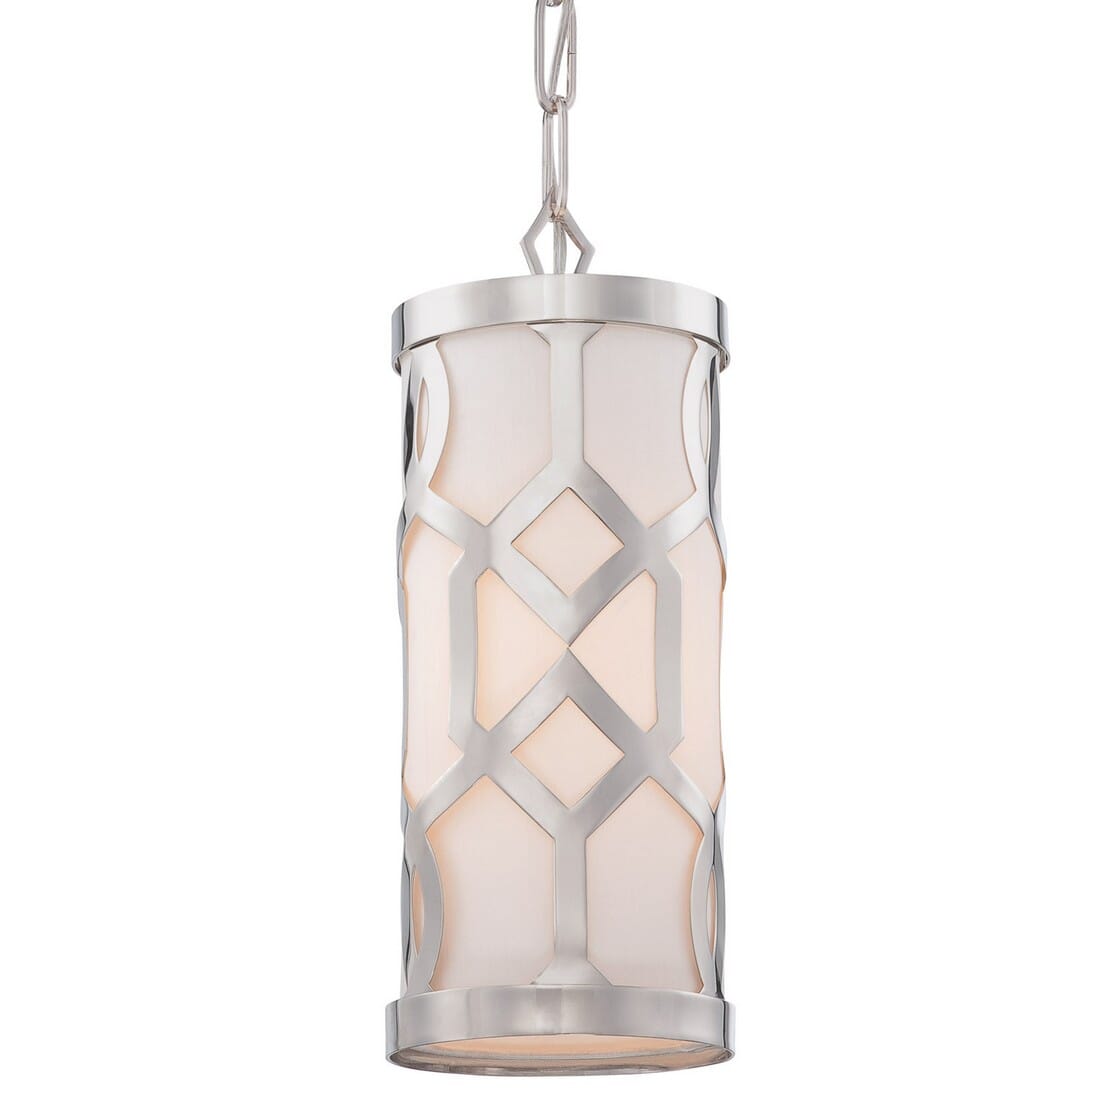 Libby Langdon for Jennings 14.25"" Pendant in Polished Nickel -  Crystorama, 2260-PN